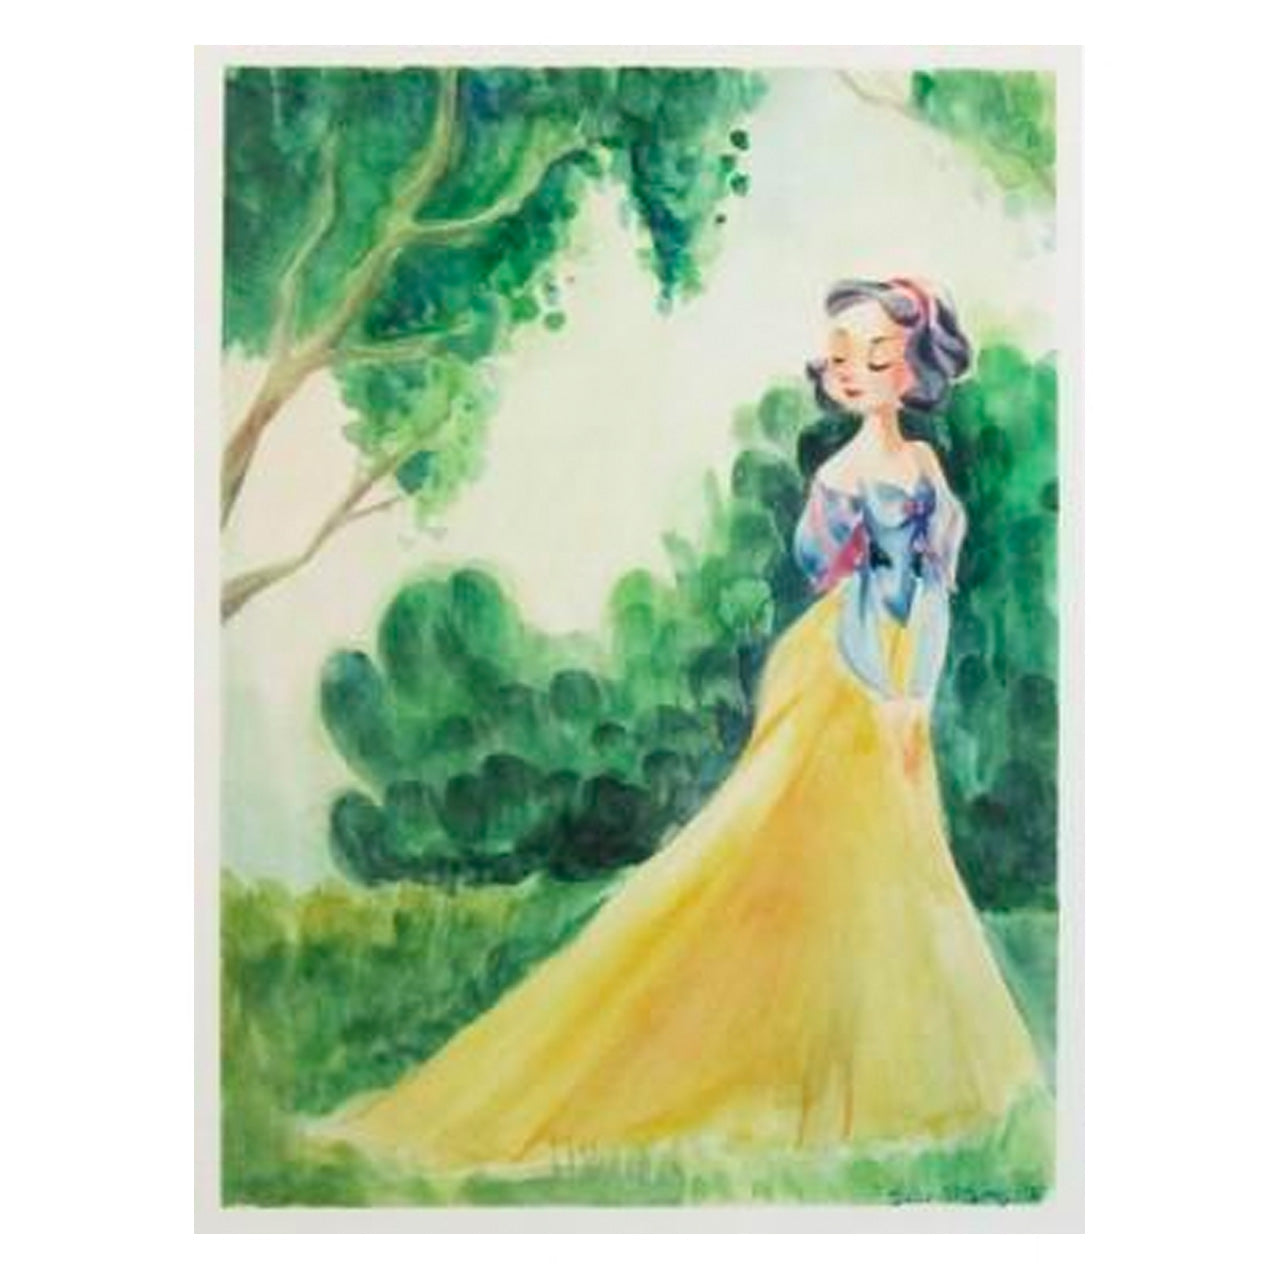 Victoria Ying Disney "The Beauty of Snow in Spring" Limited Edition Giclee